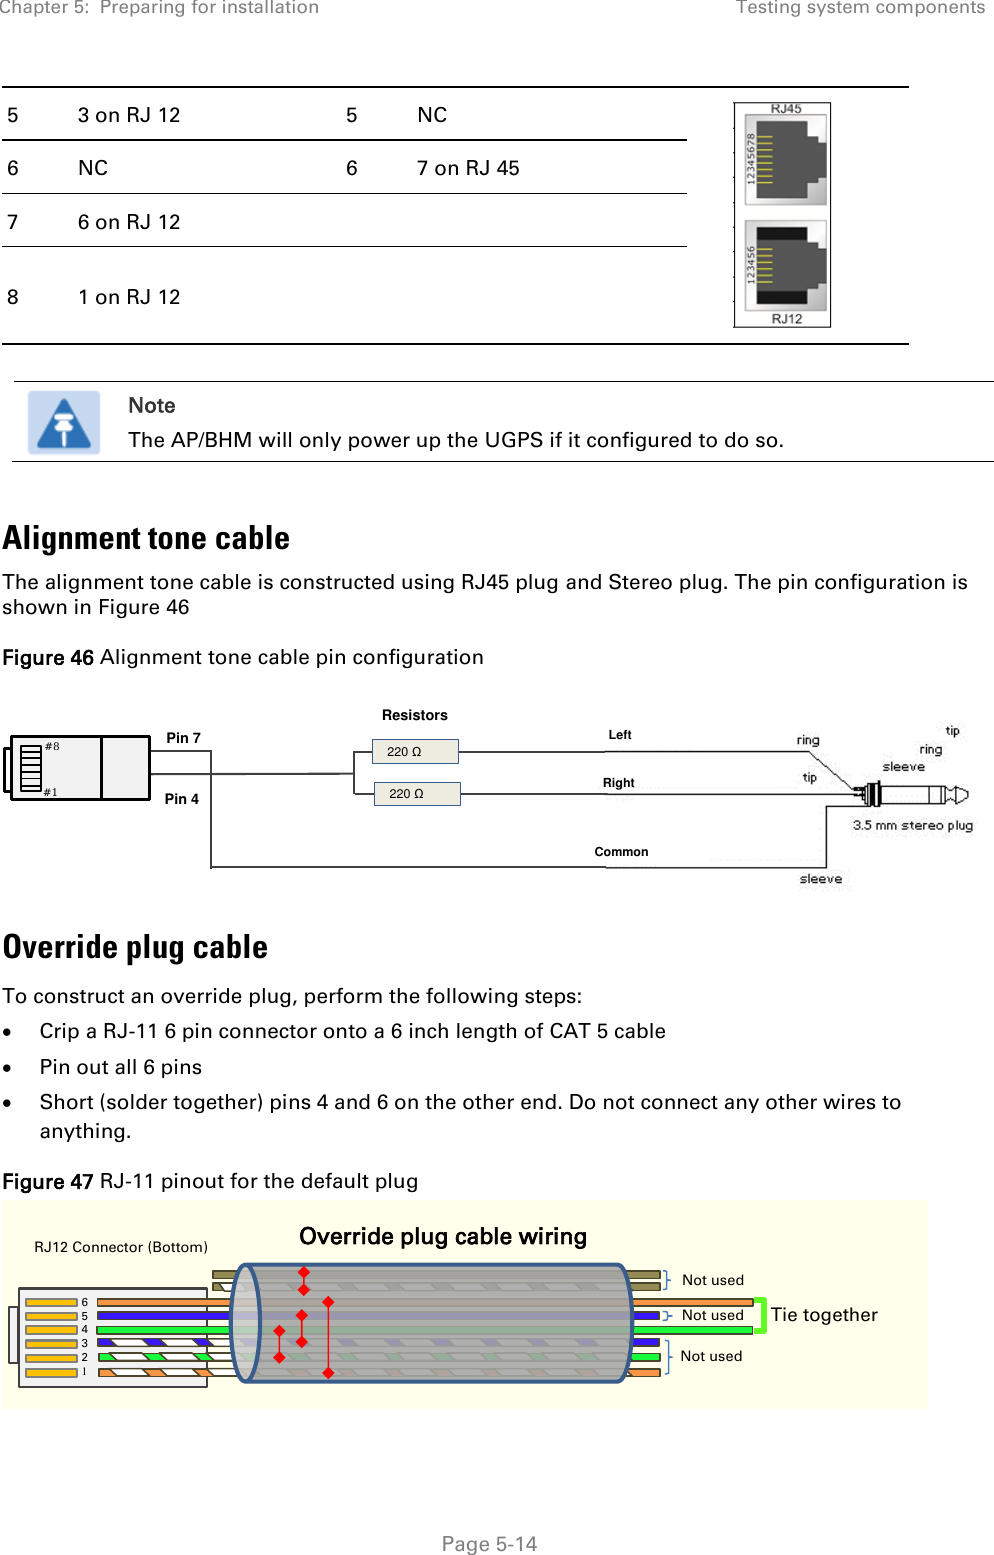 Chapter 5:  Preparing for installation Testing system components   Page 5-14 5 3 on RJ 12 5 NC  6 NC 6 7 on RJ 45 7 6 on RJ 12   8 1 on RJ 12     Note The AP/BHM will only power up the UGPS if it configured to do so.  Alignment tone cable The alignment tone cable is constructed using RJ45 plug and Stereo plug. The pin configuration is shown in Figure 46 Figure 46 Alignment tone cable pin configuration  Override plug cable To construct an override plug, perform the following steps:  Crip a RJ-11 6 pin connector onto a 6 inch length of CAT 5 cable  Pin out all 6 pins  Short (solder together) pins 4 and 6 on the other end. Do not connect any other wires to anything.  Figure 47 RJ-11 pinout for the default plug    220 Ω  220 Ω Resistors Pin 7 Pin 4 Left Right   Common #8 #1 `` RJ12 Connector (Bottom) Override plug cable wiring 6  5 4 3 2 1 Tie together Not used Not used Not used 